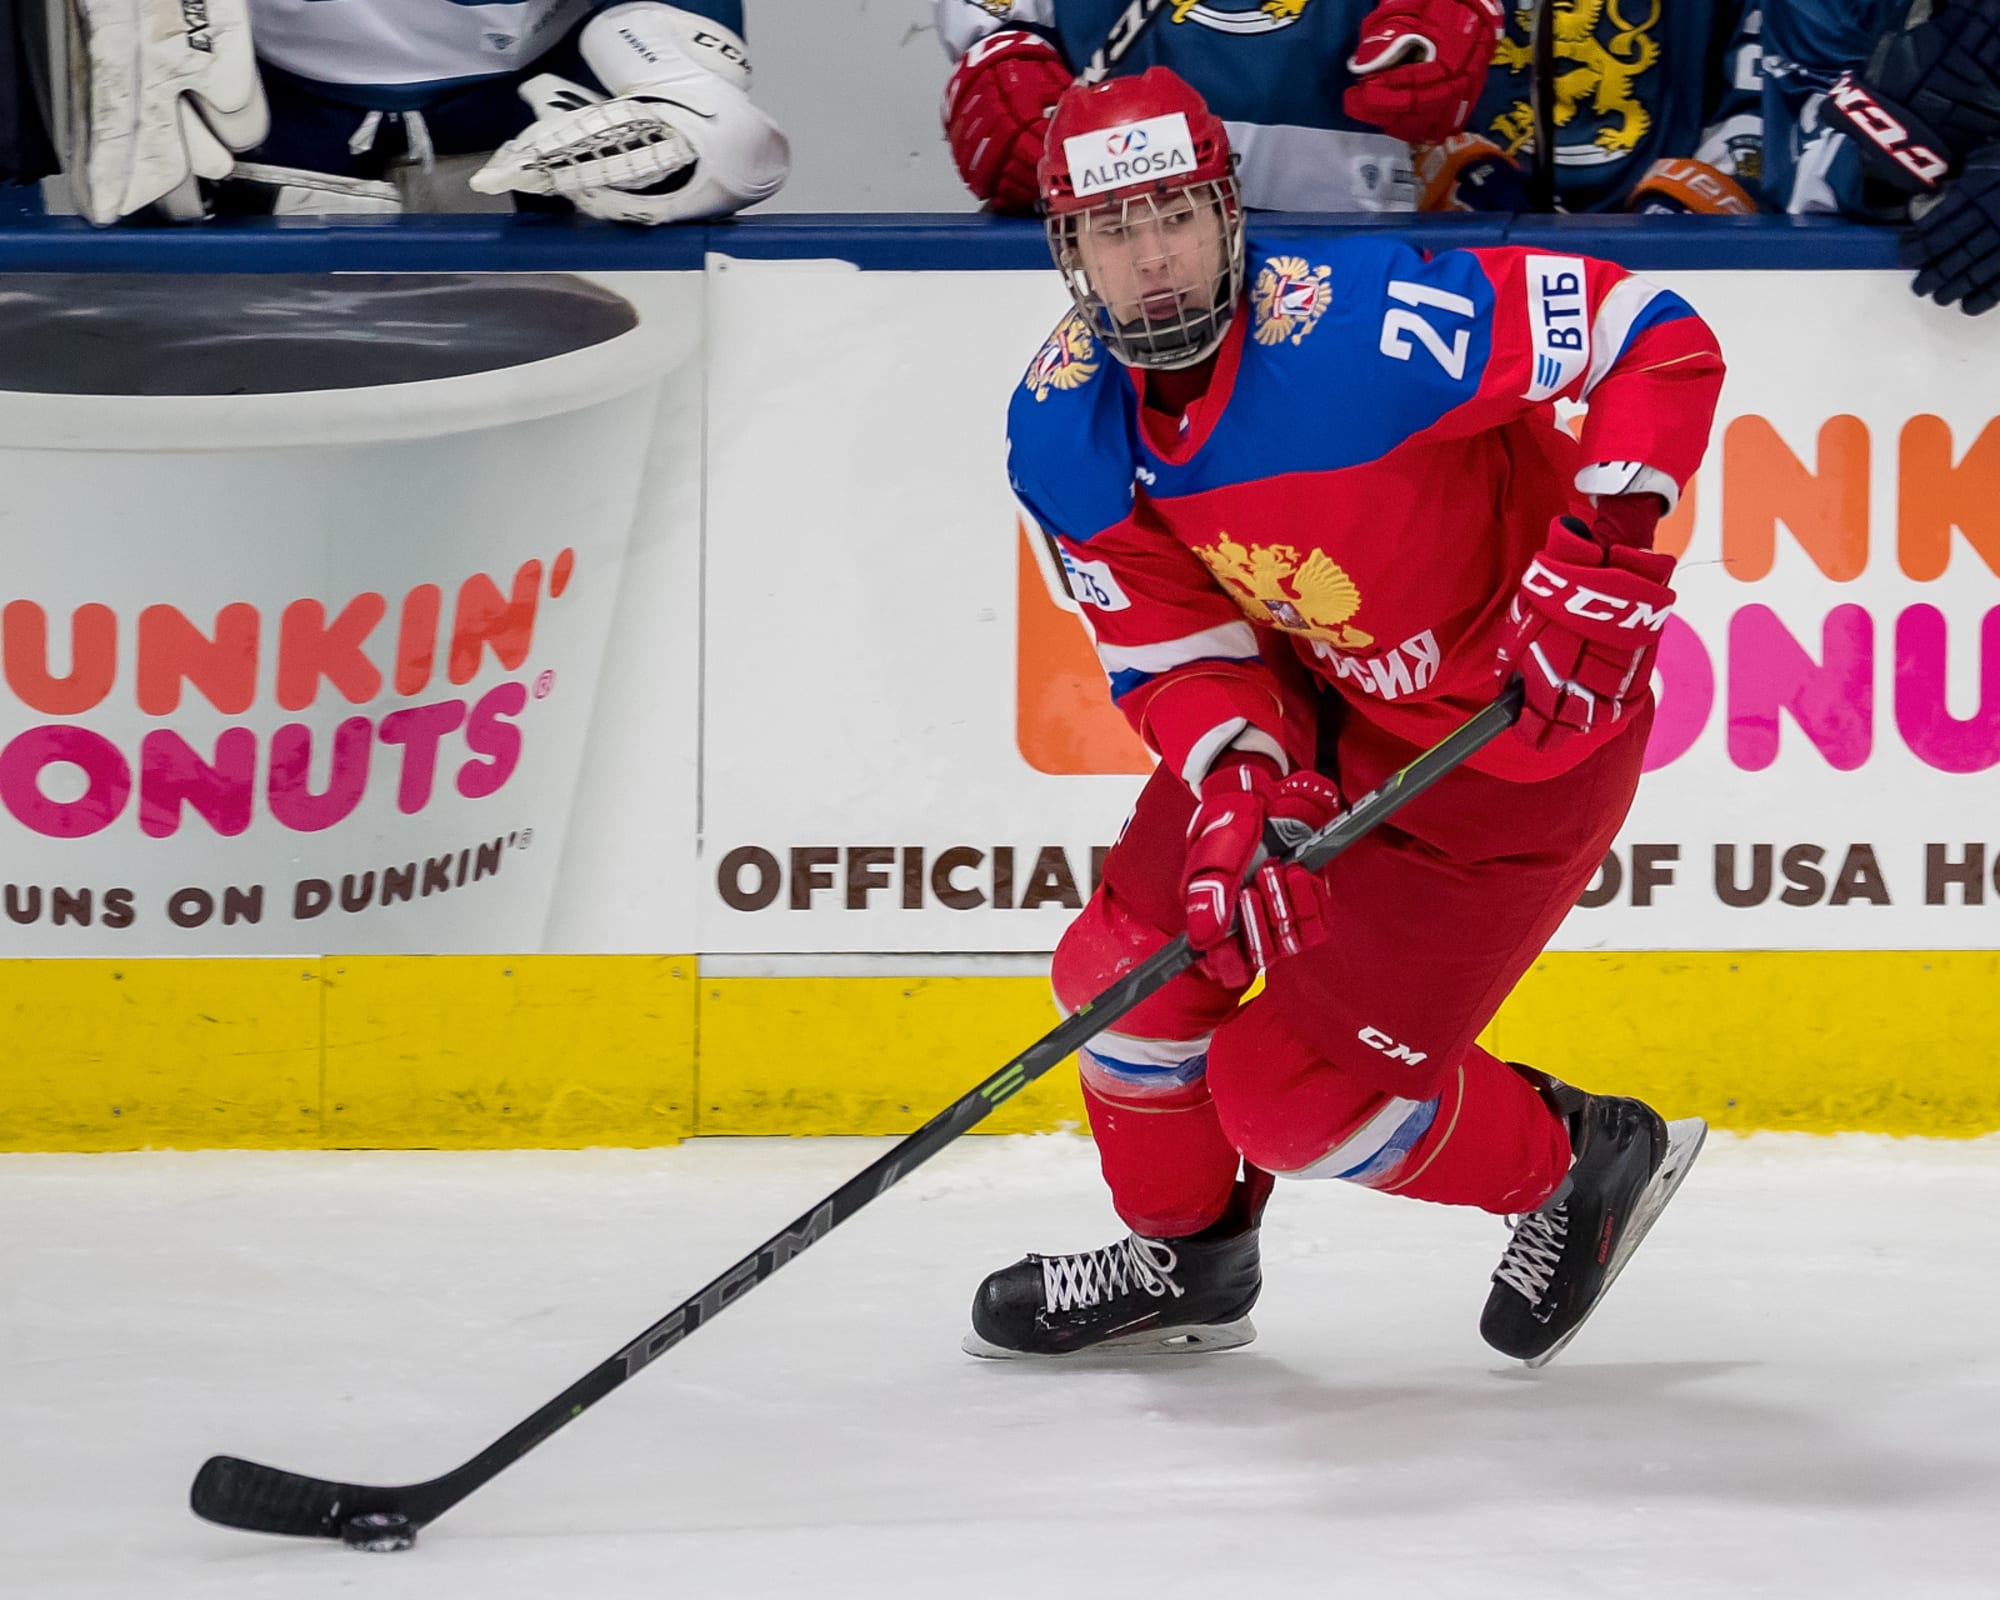 SCoC Draft Profiles: Kirill Marchenko is a crazy-skilled winger